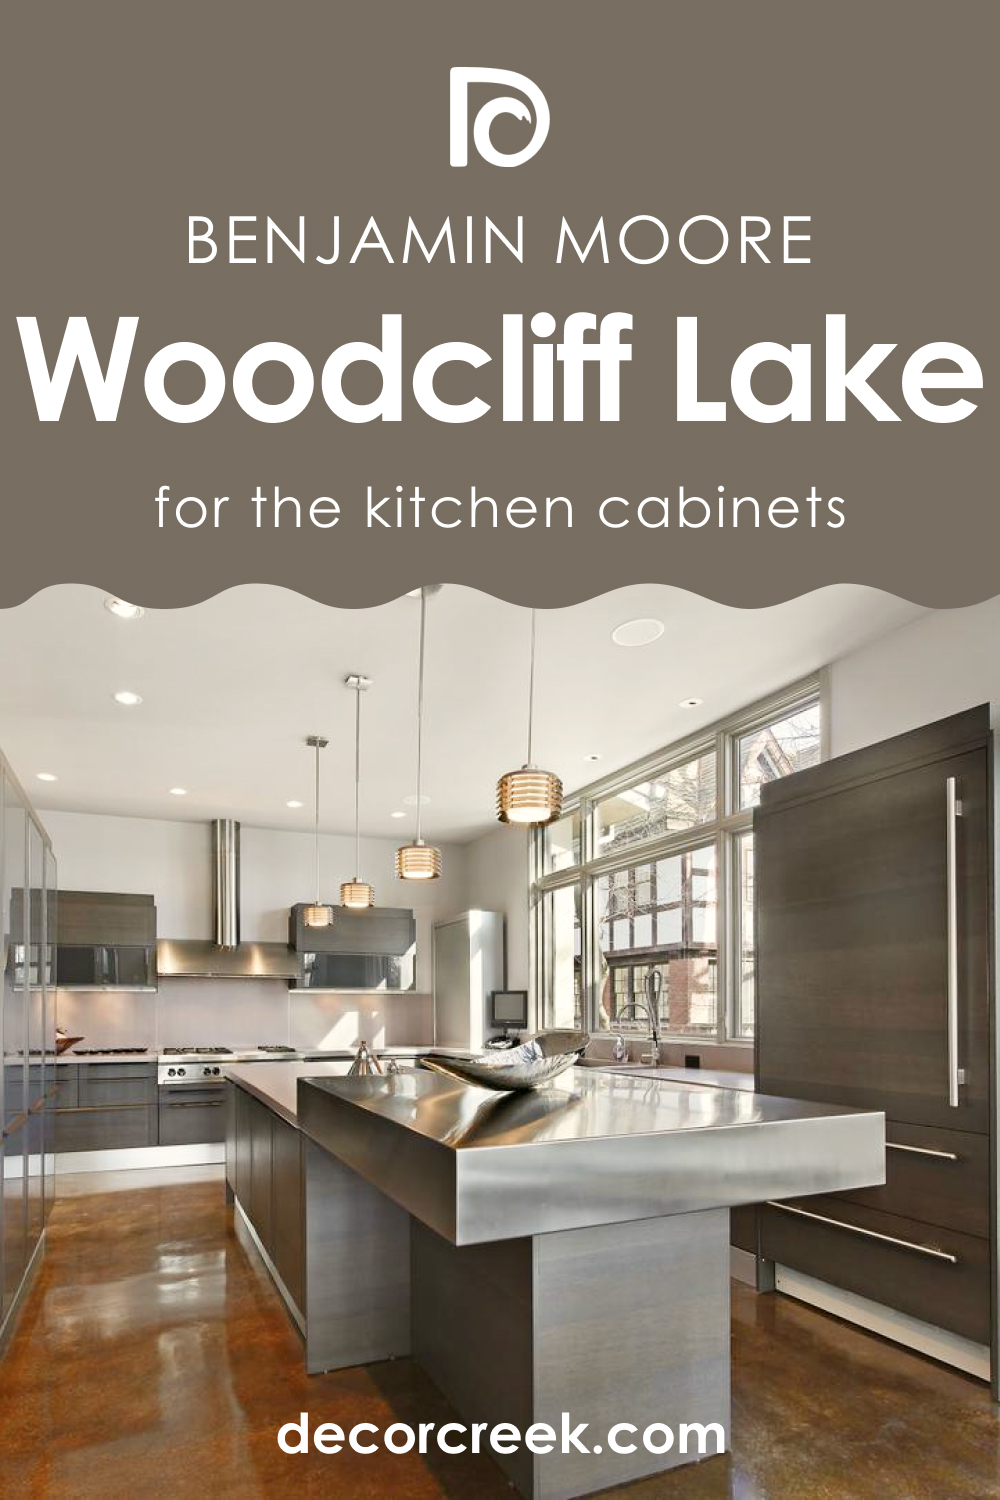 Woodcliff Lake 980 on the Kitchen Cabinets